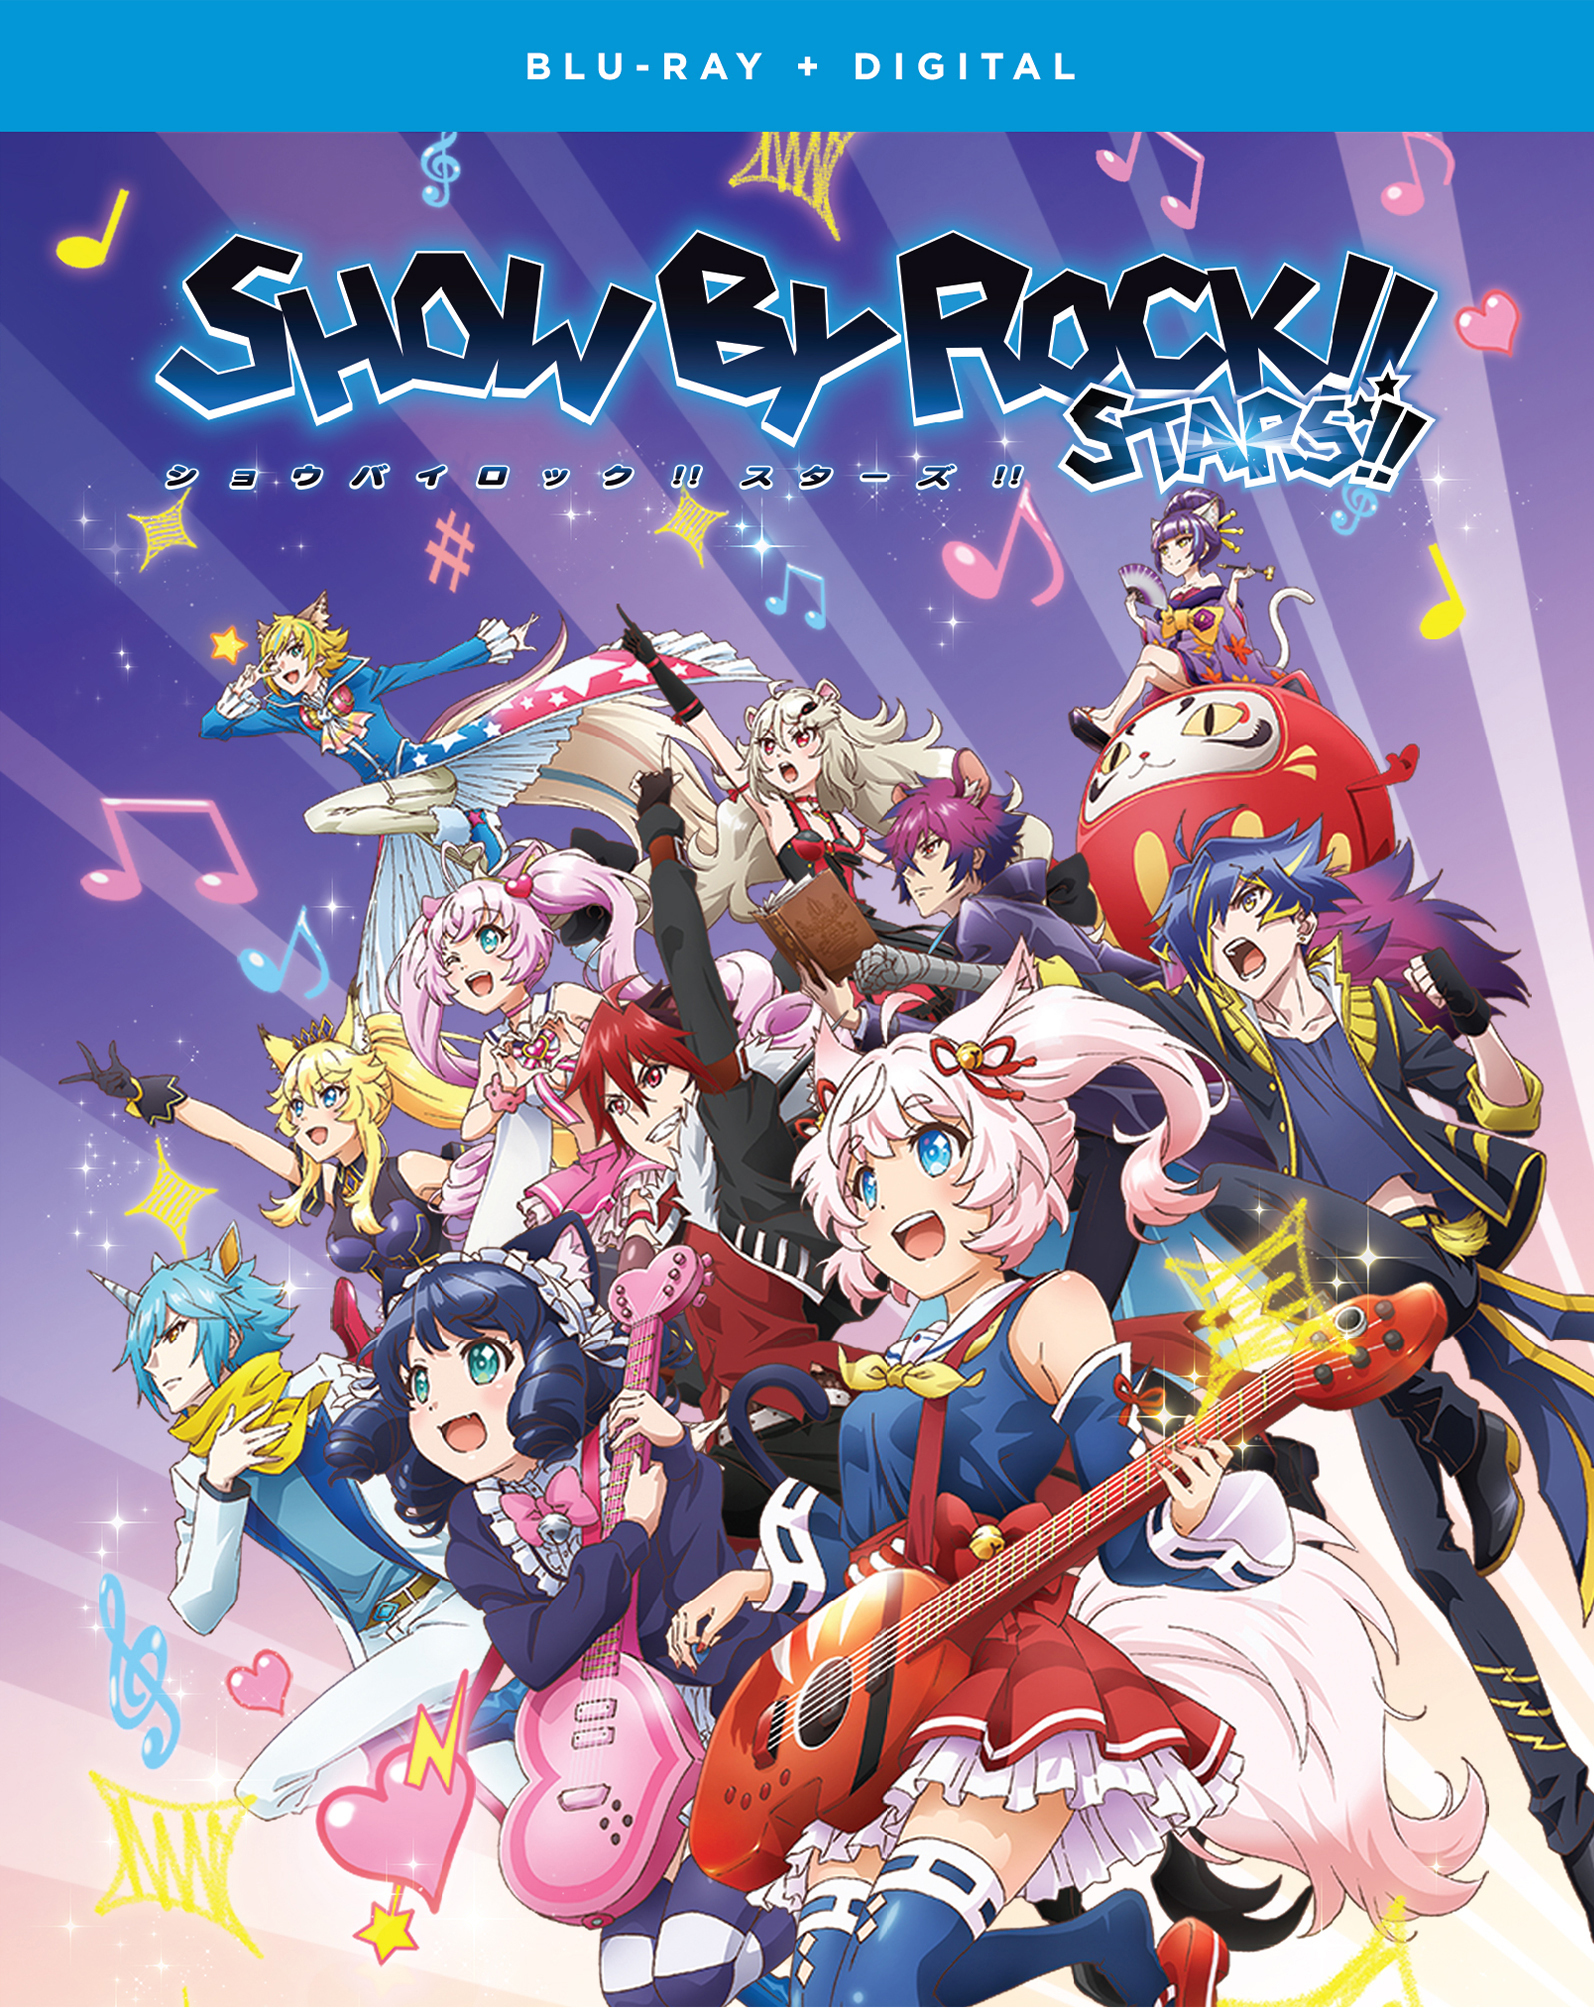 Show by Rock!! Stars!! Icon Folder by assorted24 on DeviantArt